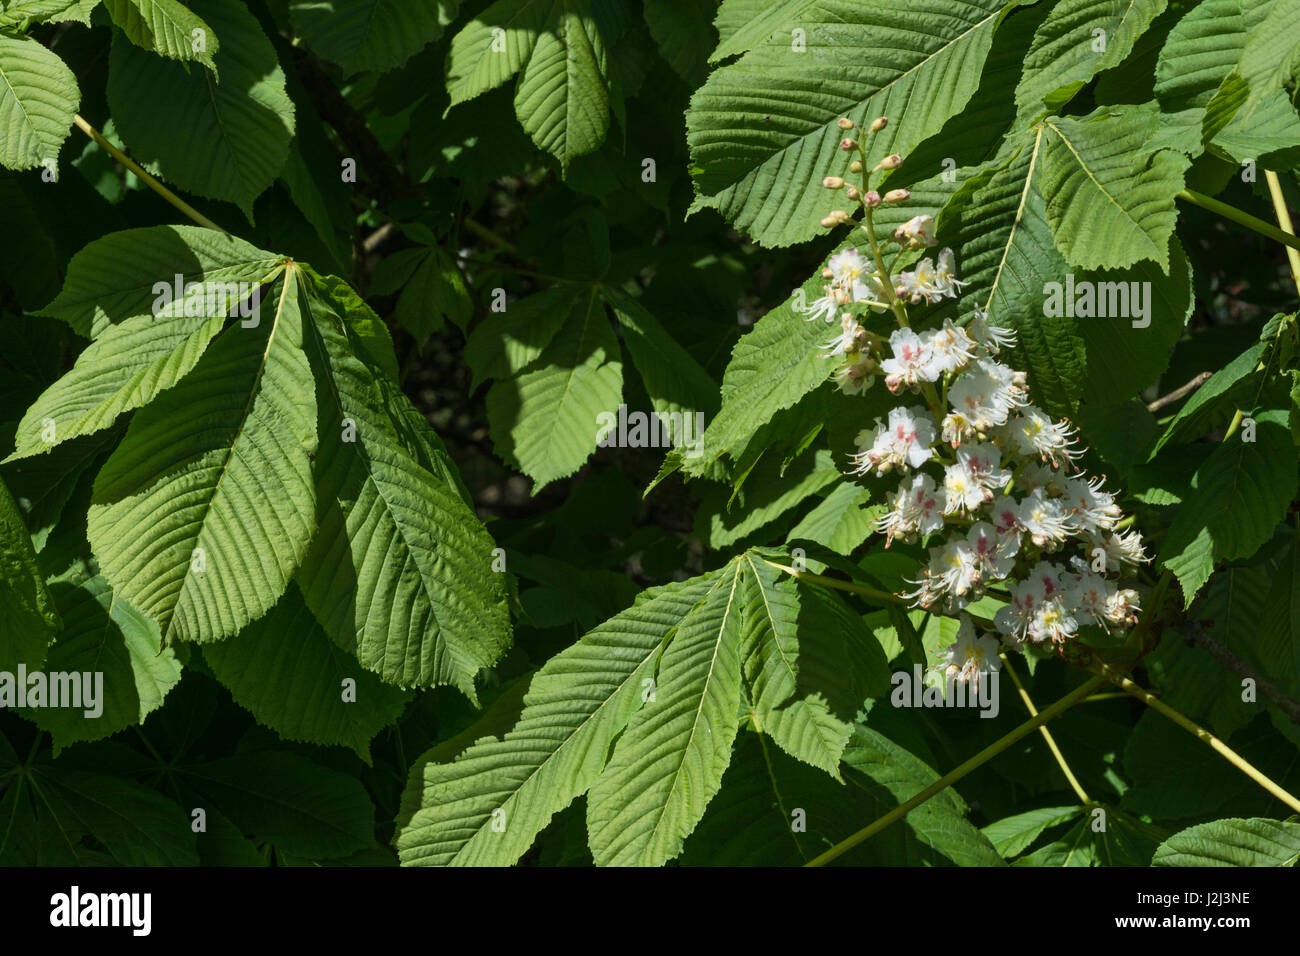 Flowers of the Horse Chestnut / Aesculus hippocastanum tree - which provides 'conkers' for kids to play with. Once used as a medicinal plant. Stock Photo